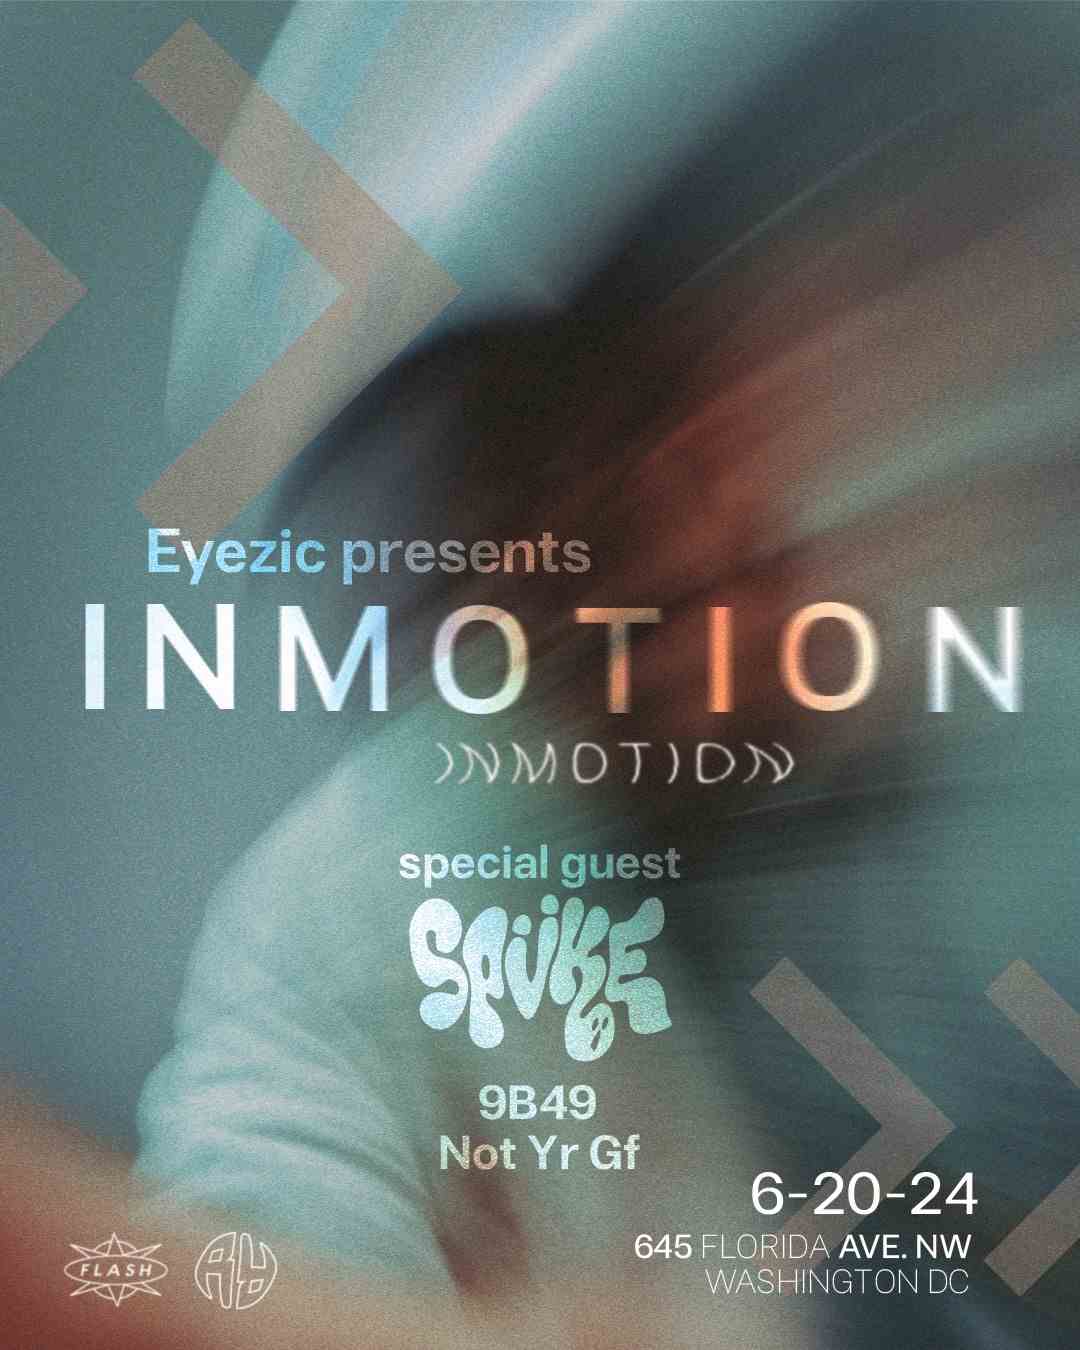 Eyezic Presents: In Motion event flyer